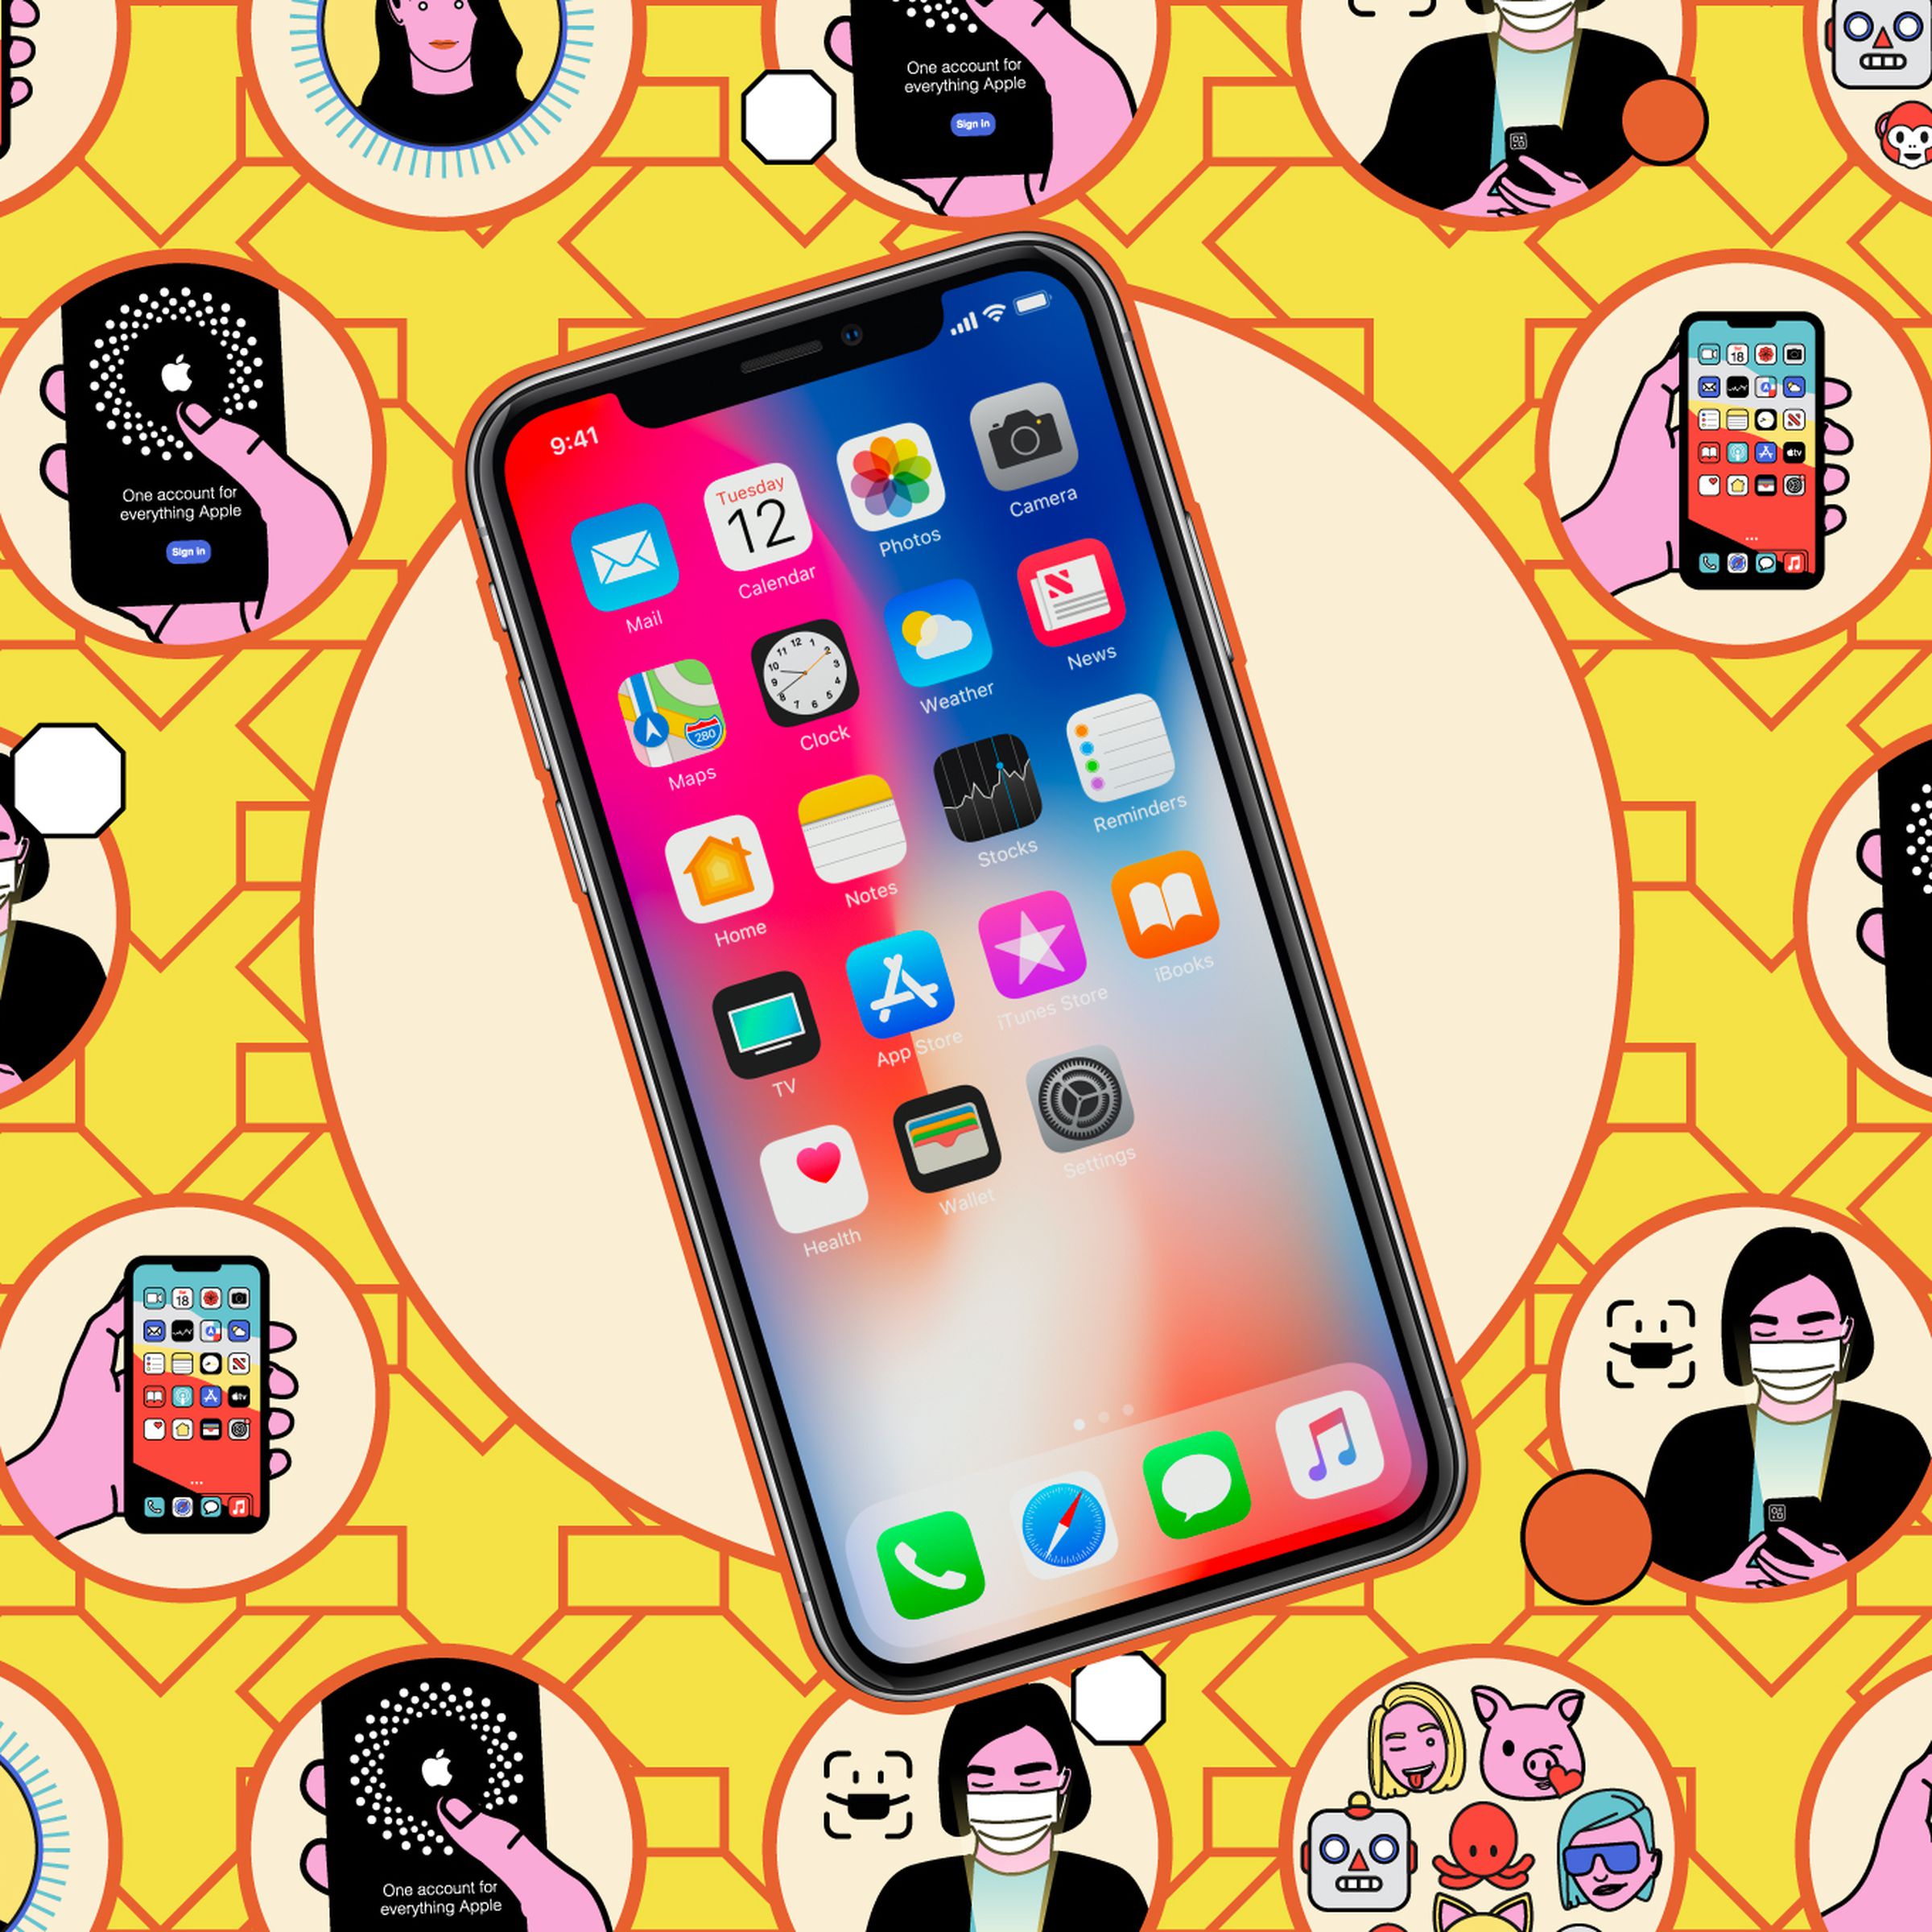 An iPhone overlaid on a yellowish circle with red border, with circles laid out in a honeycomb grid surrounding it that have small illustrations of iOS-themed images.